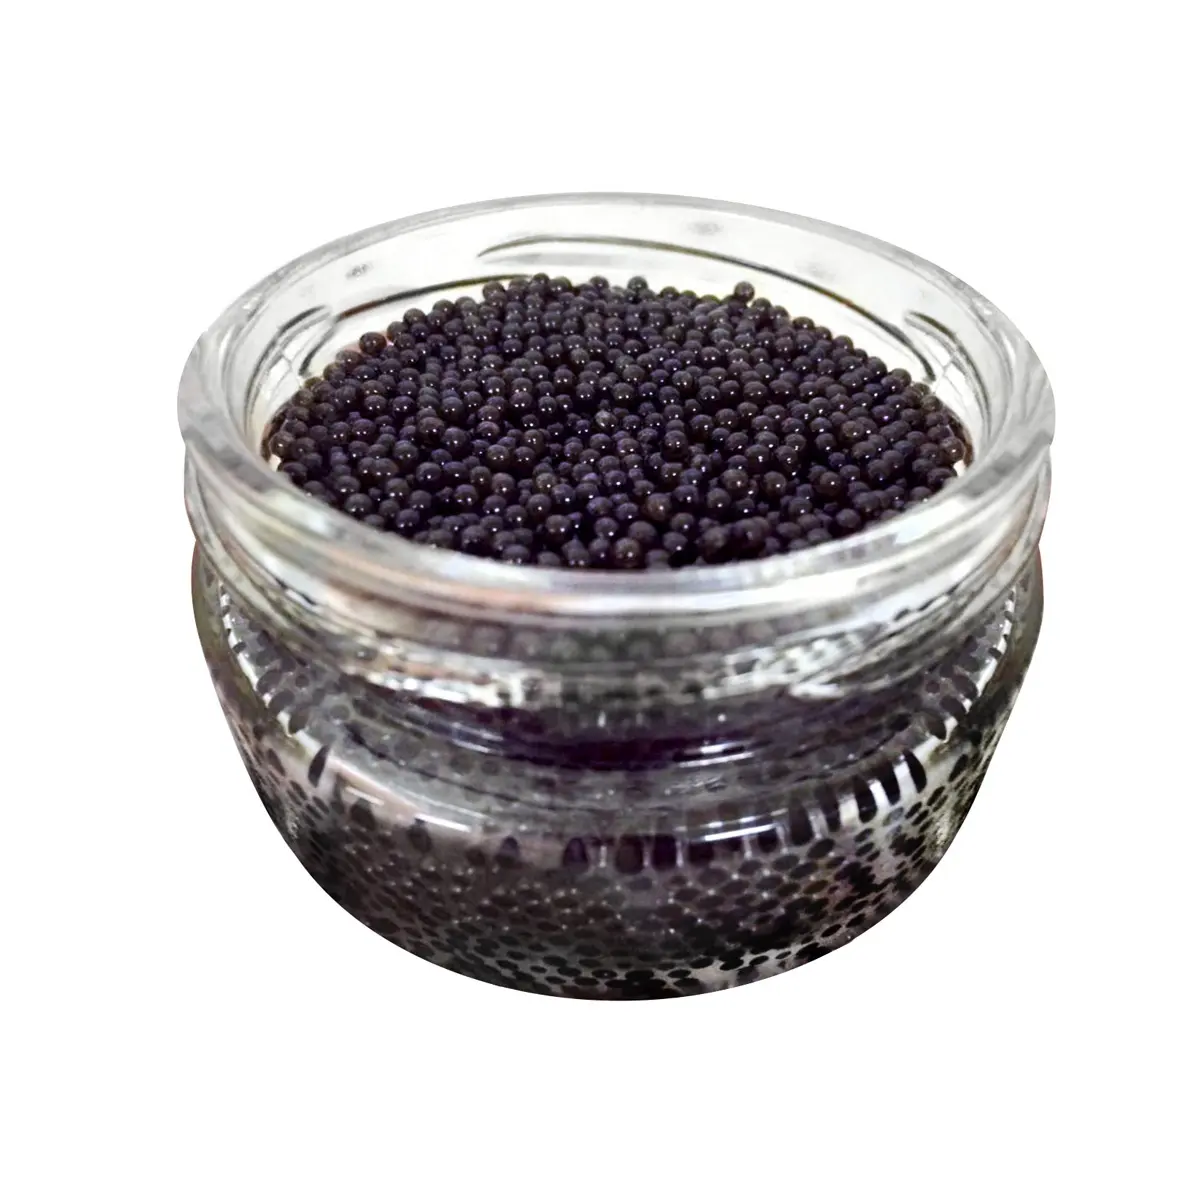 Gourmet farm-raised bester fish roe packaged in glass jar from manufacturer